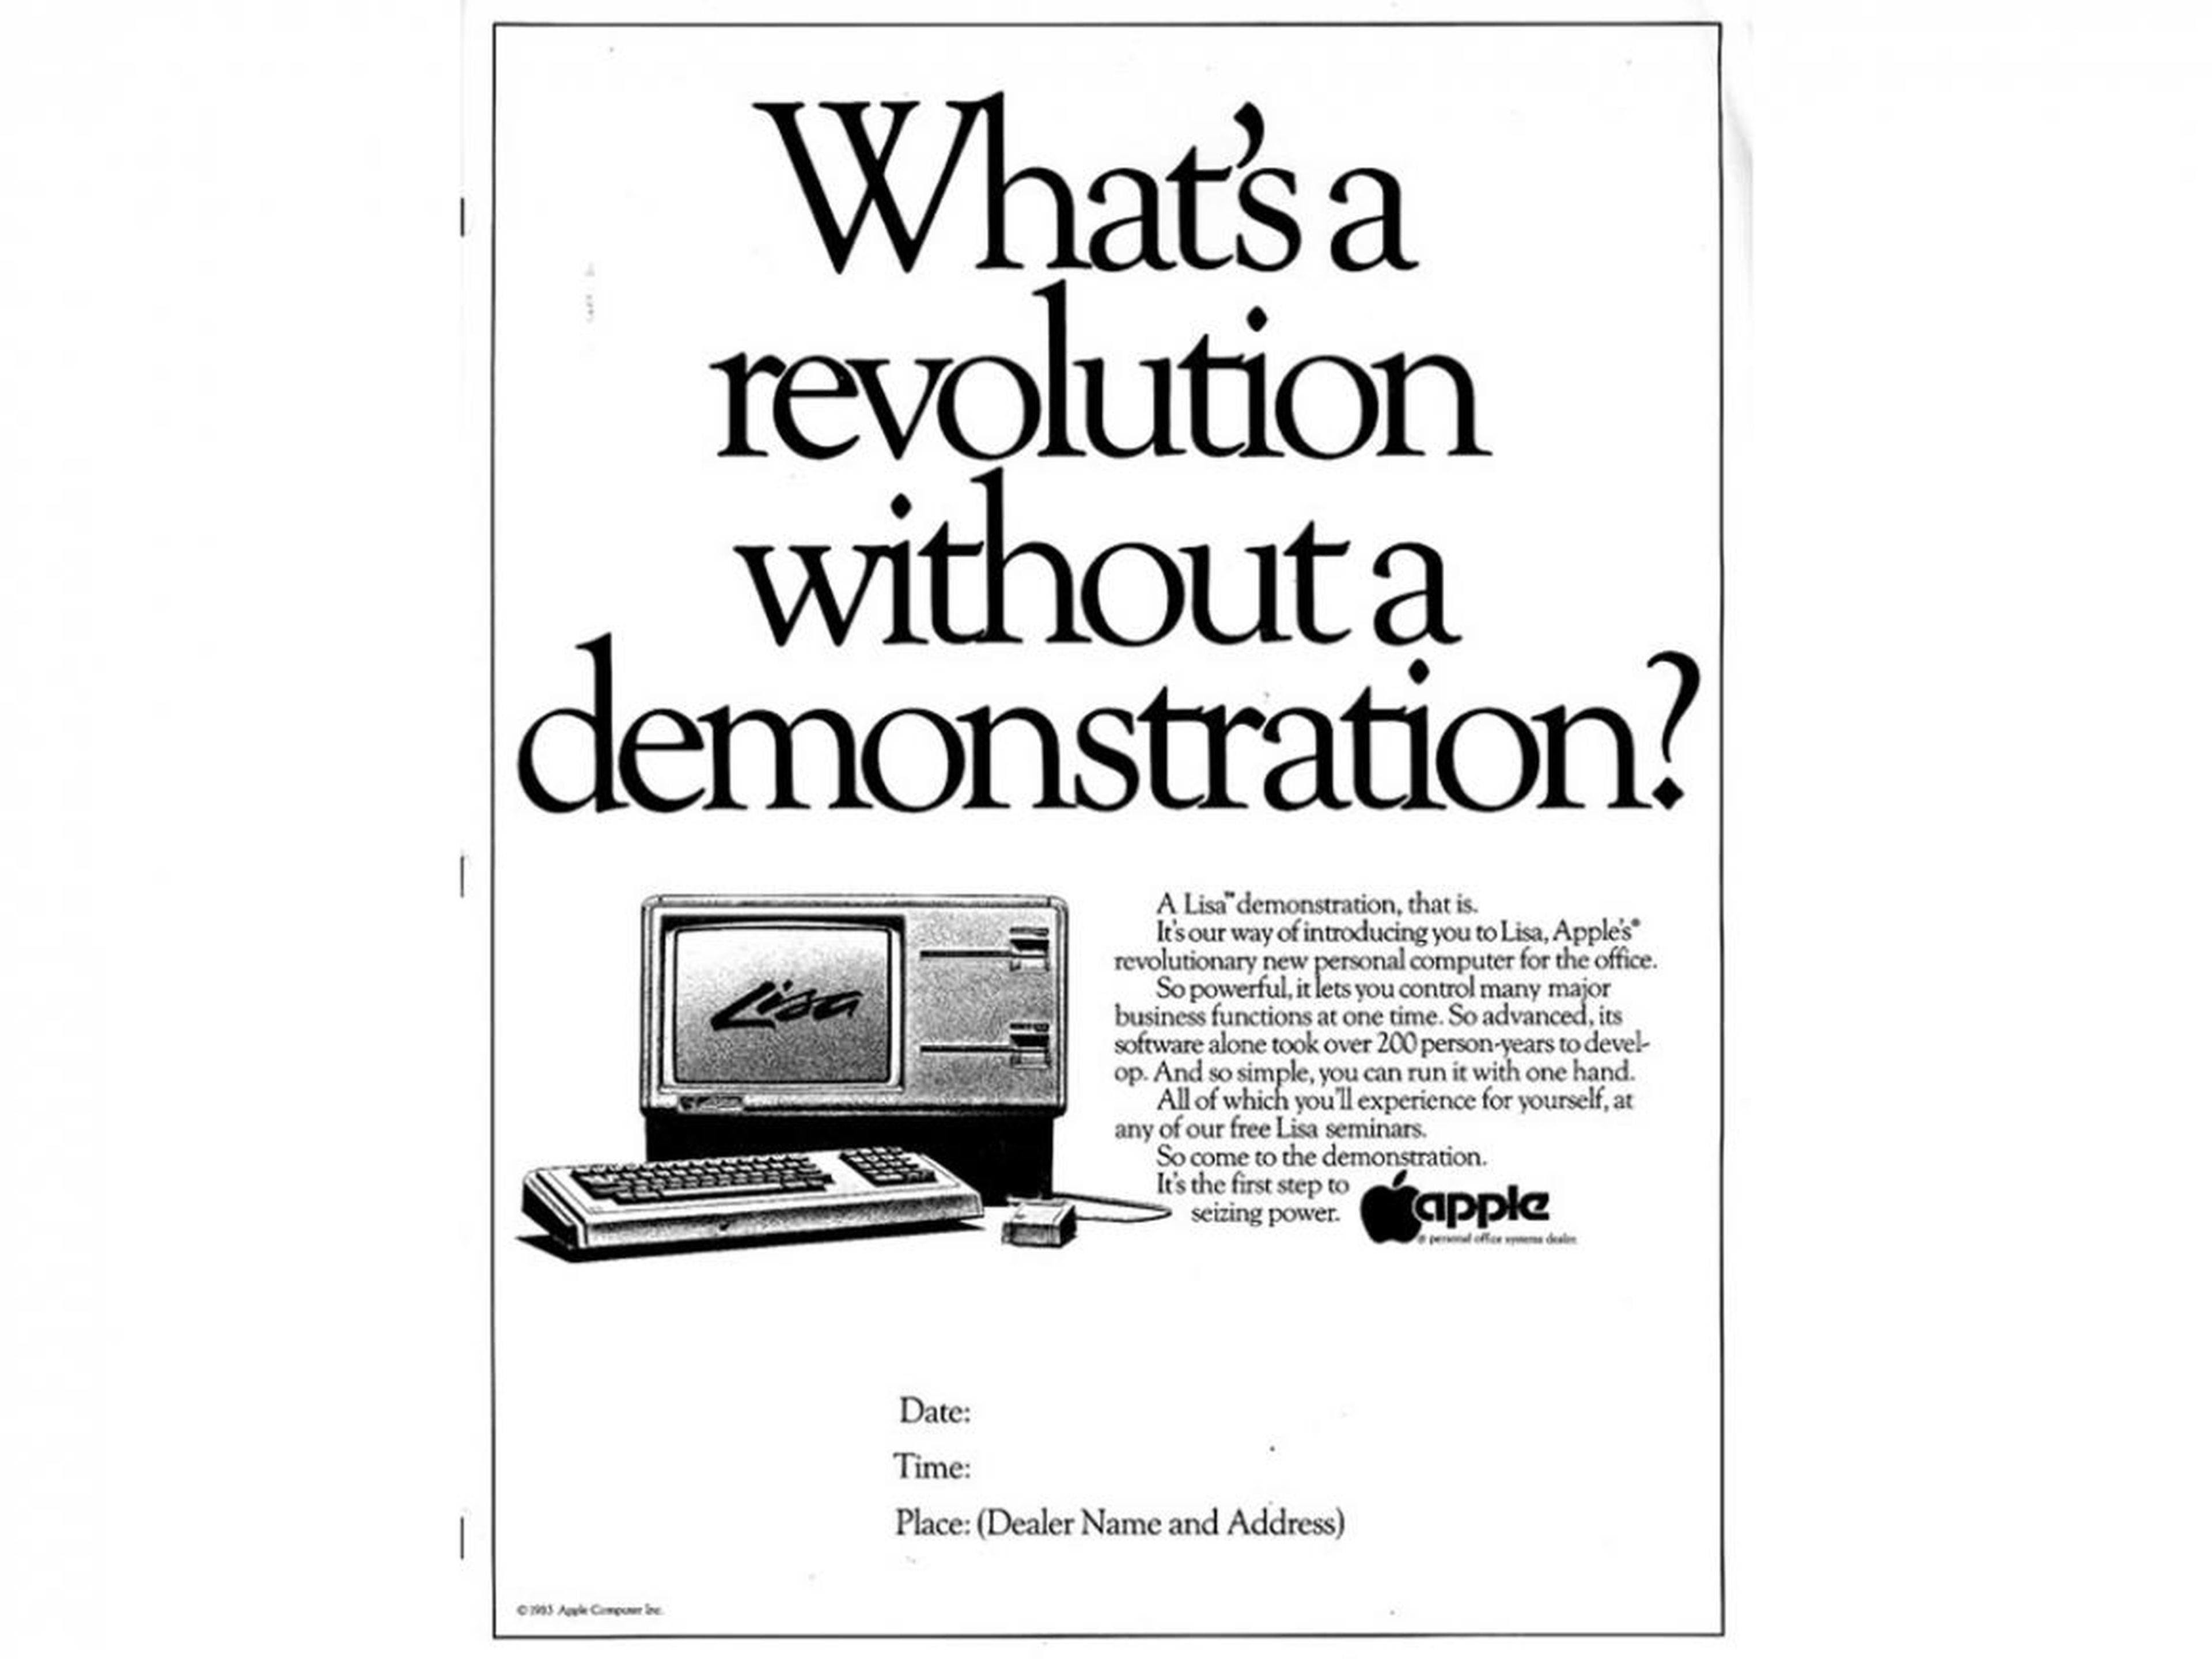 Apple used to offer in-office demonstrations.